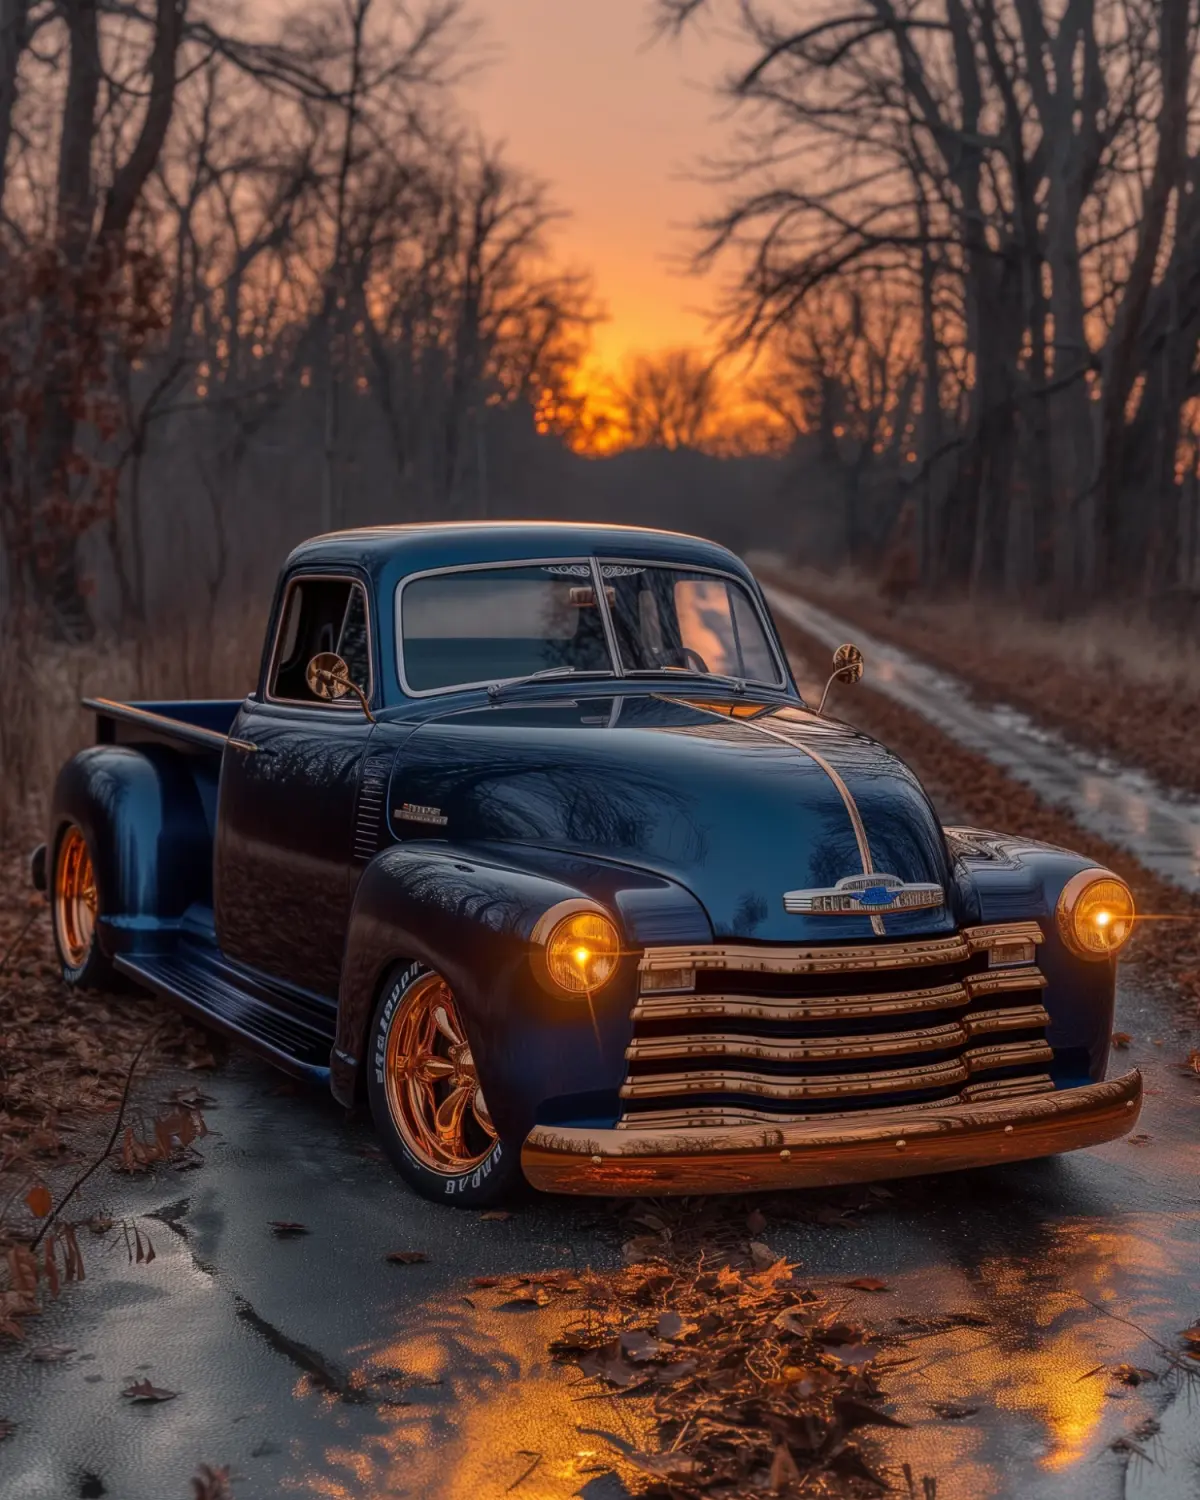 Restomod 1950s Chevy Pickup blending classic design with modern enhancements